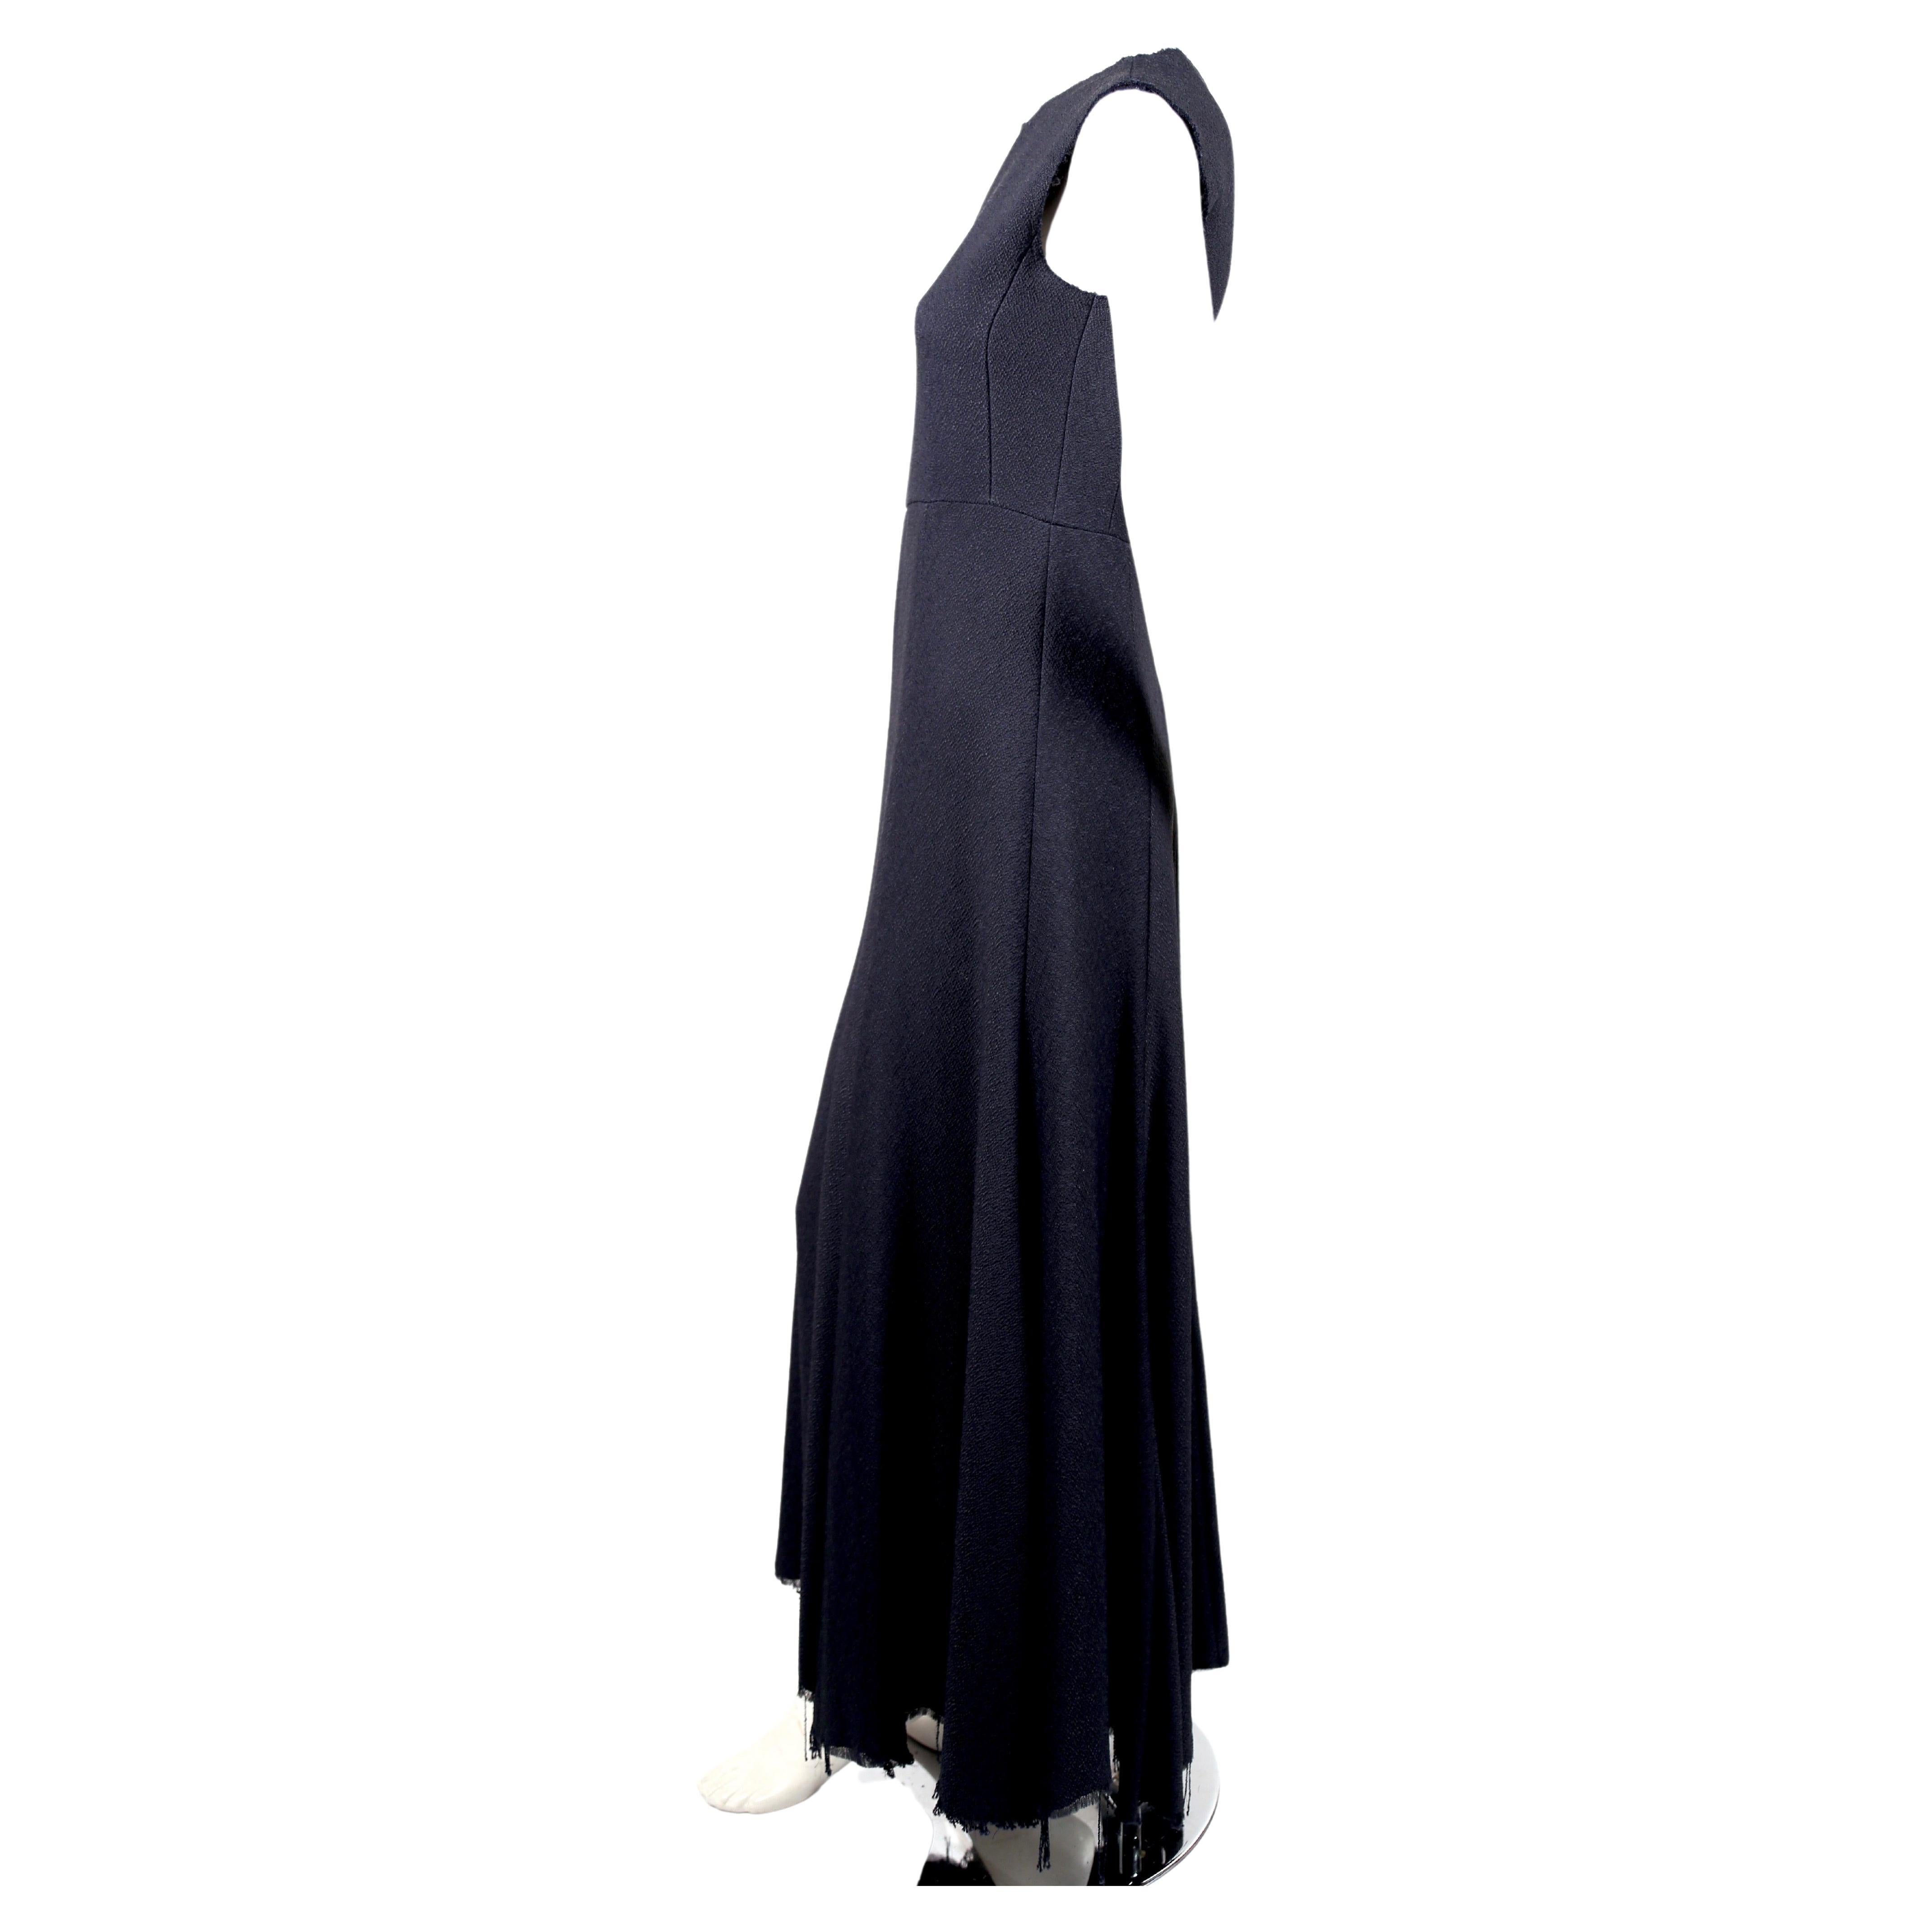 Very rare, deepest navy blue seamed maxi dress with raw edges and fringed hemline designed by Phoebe Philo for Celine exactly as seen on the 2013 spring runway and featured in the spring 2013 Celine ad campaign. Color is deep navy blue, almost